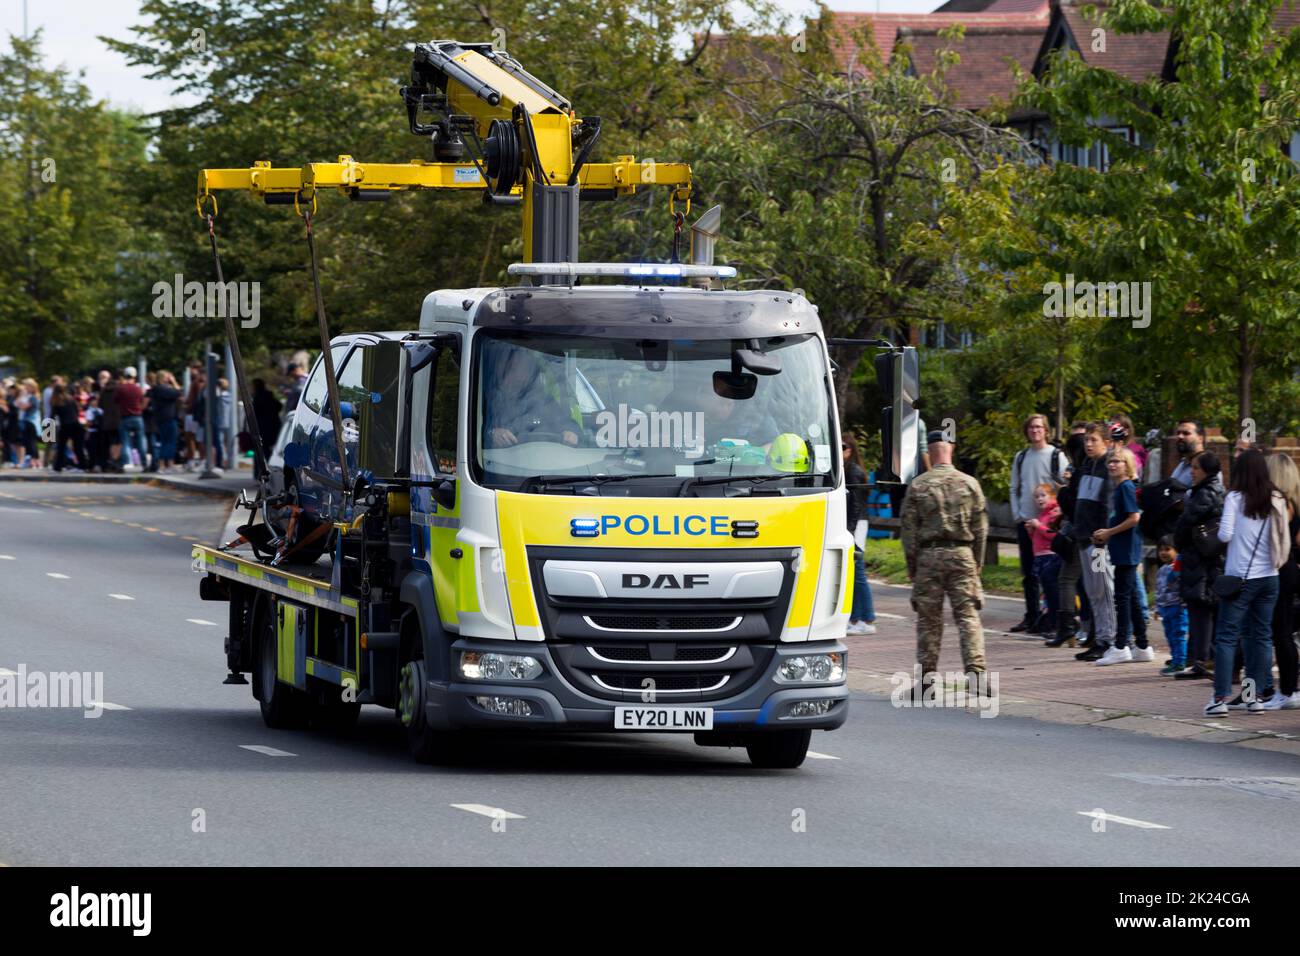 Police tow away vehicle truck removes and illegally parked car at a large event in London. The numberplate of the vehicle has been digitally altered and does not show the real registration. (132) Stock Photo